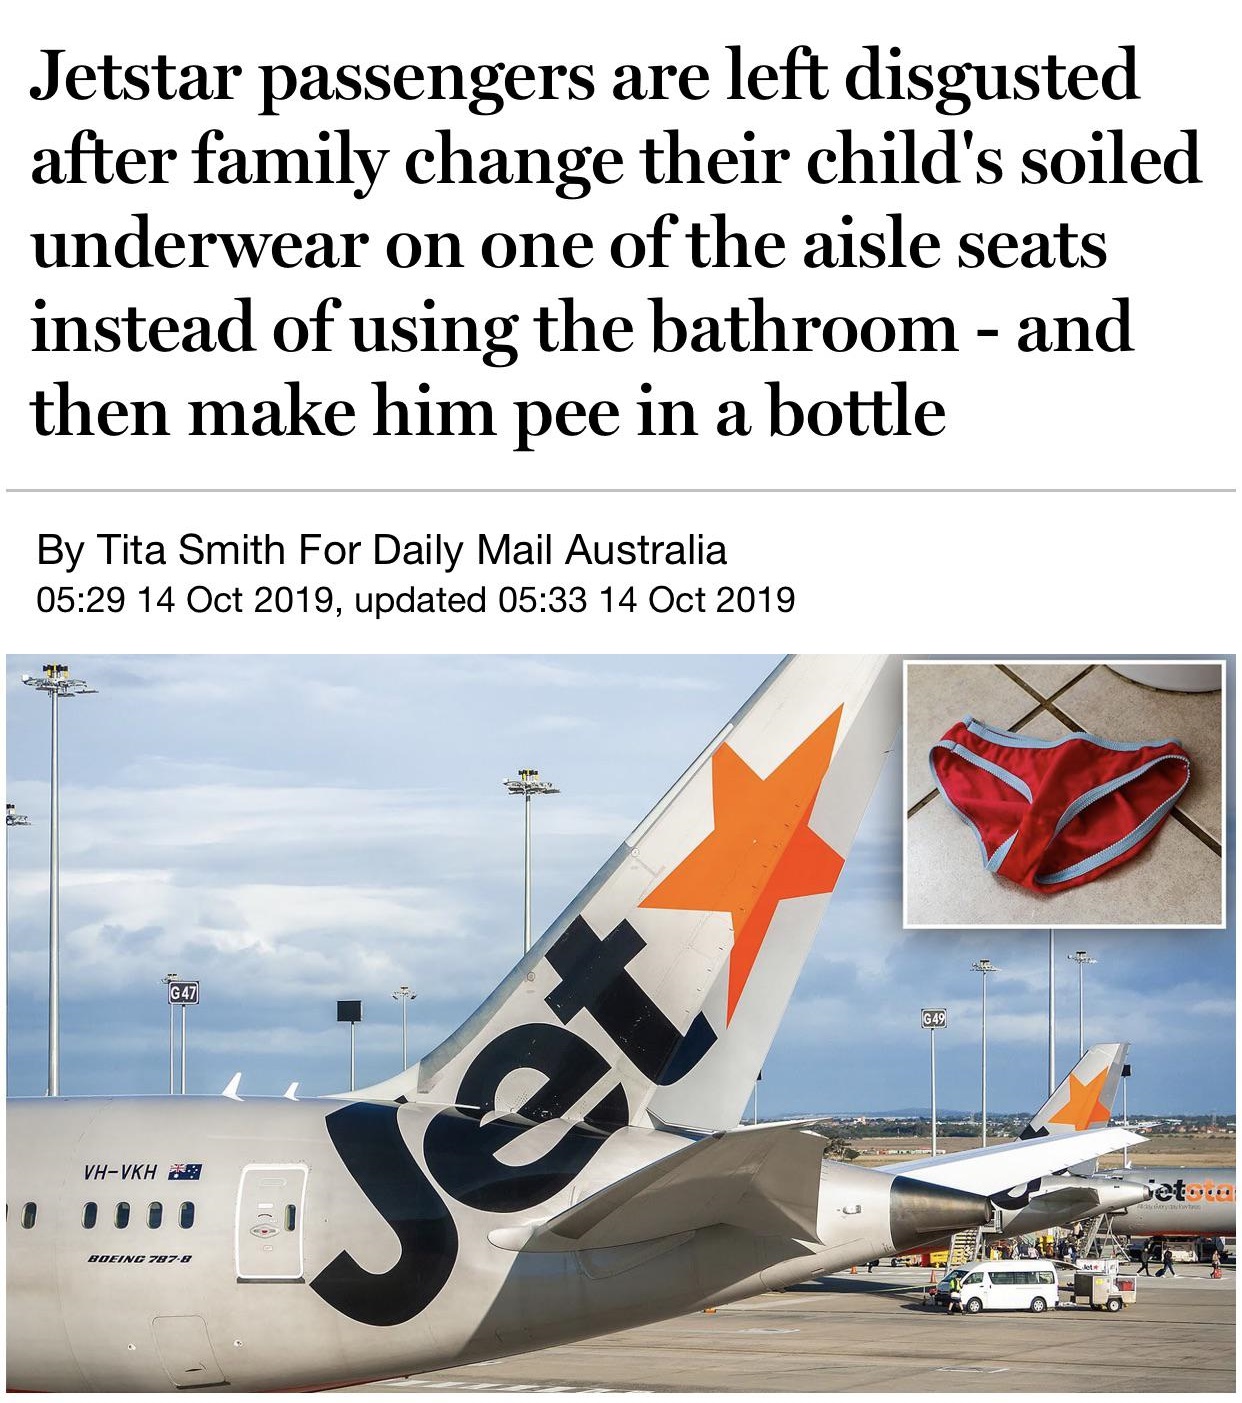 quotes - Jetstar passengers are left disgusted after family change their child's soiled underwear on one of the aisle seats instead of using the bathroom and then make him pee in a bottle By Tita Smith For Daily Mail Australia , updated